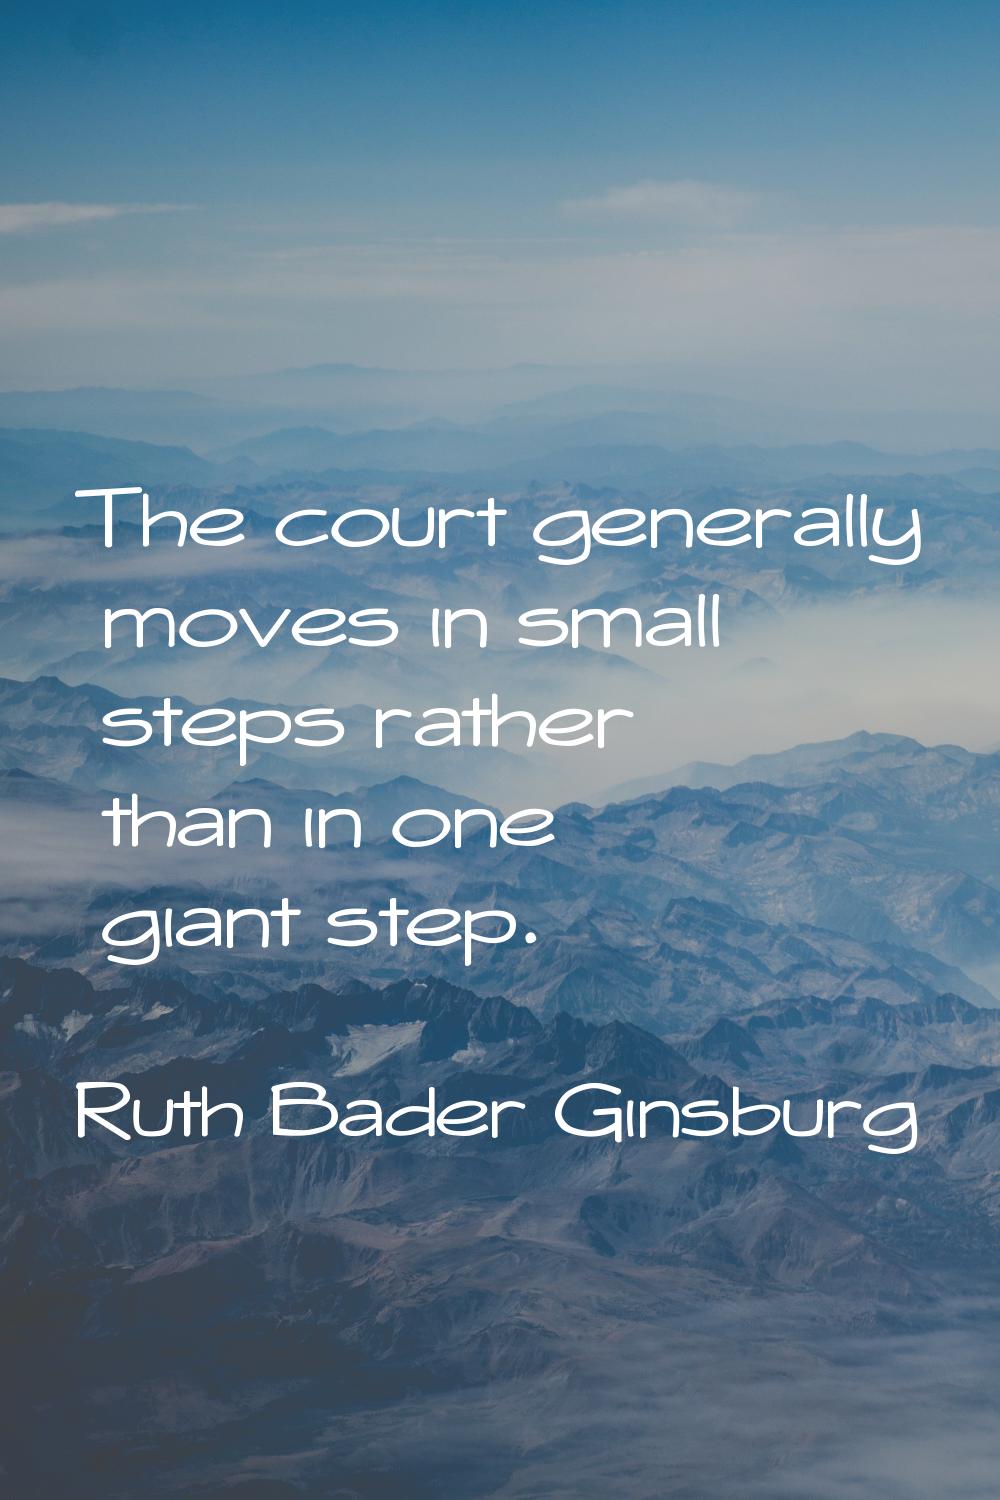 The court generally moves in small steps rather than in one giant step.